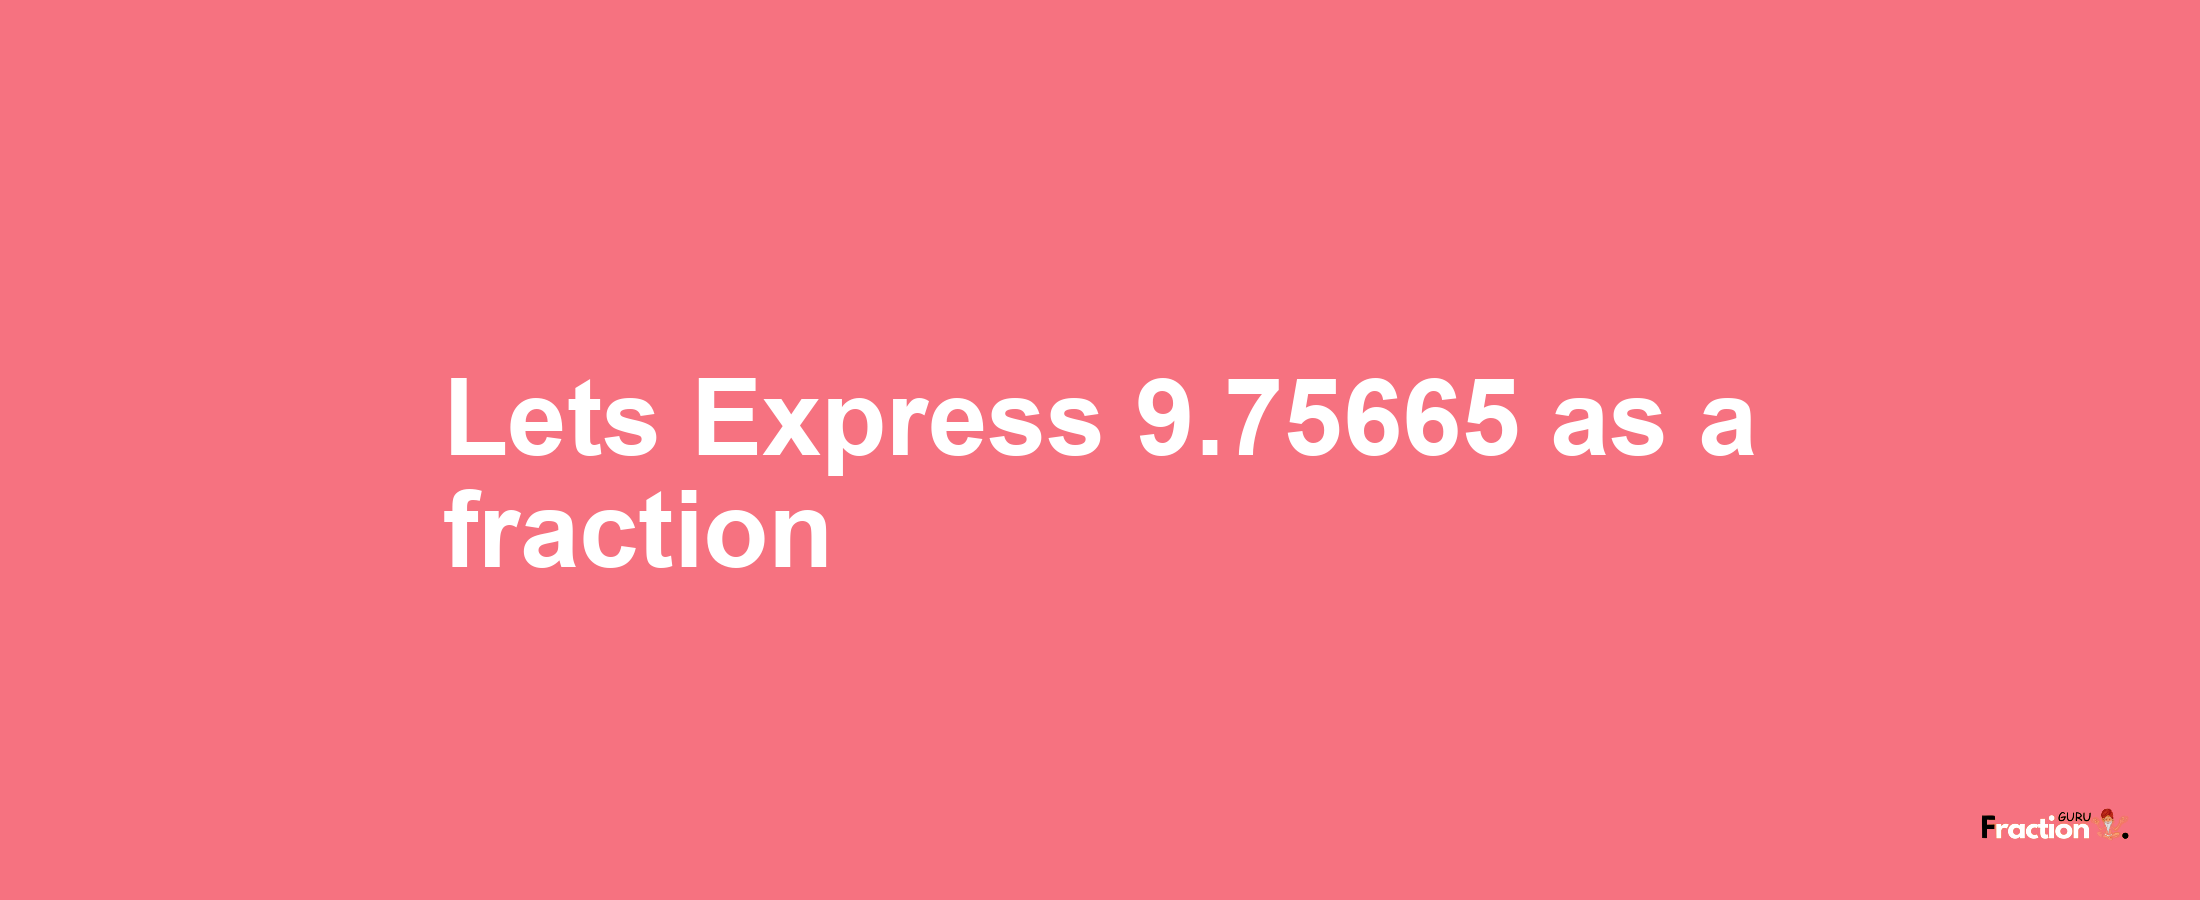 Lets Express 9.75665 as afraction